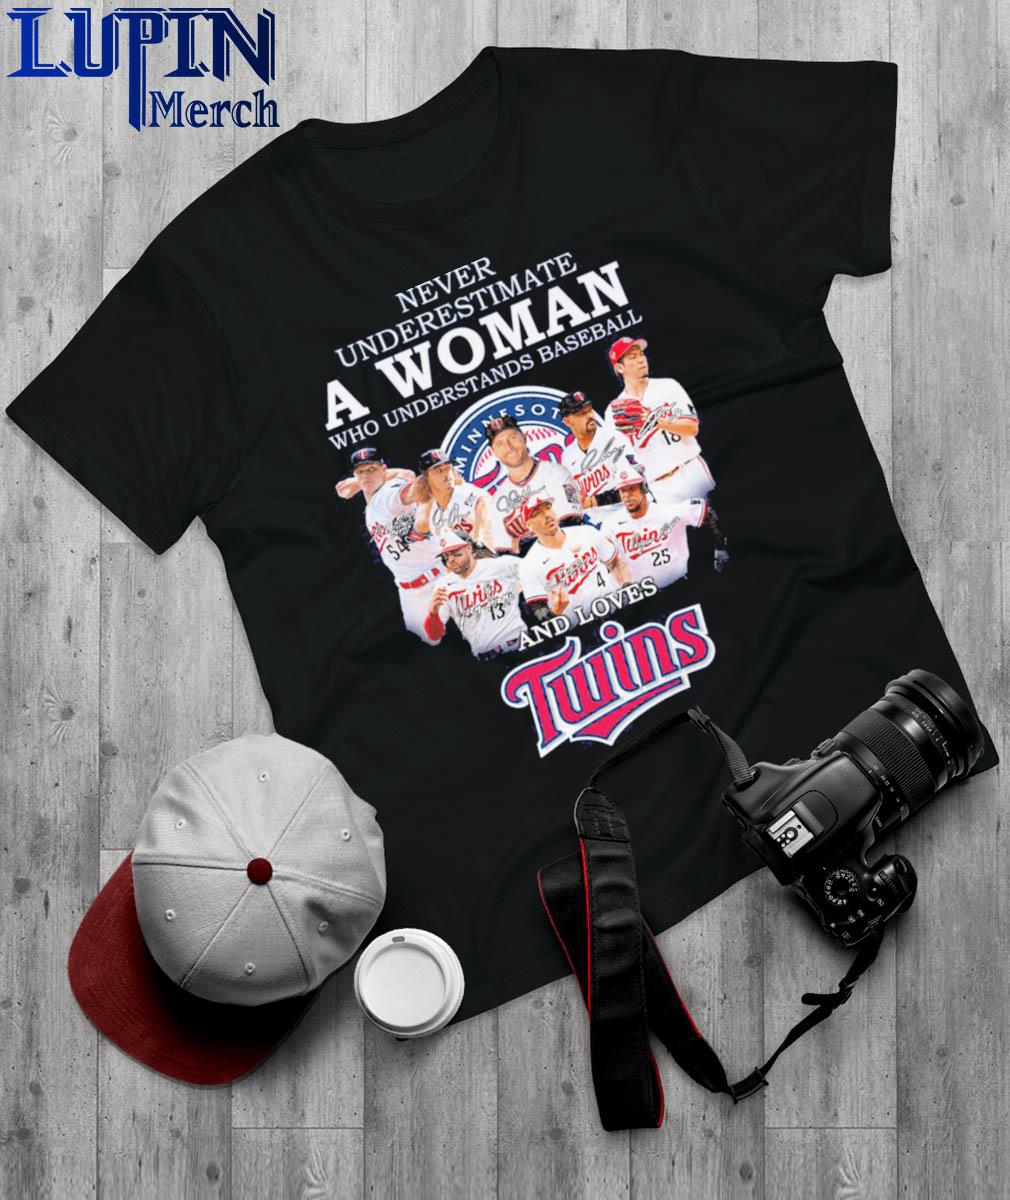 Funny Never underestimate a woman who understands baseball and